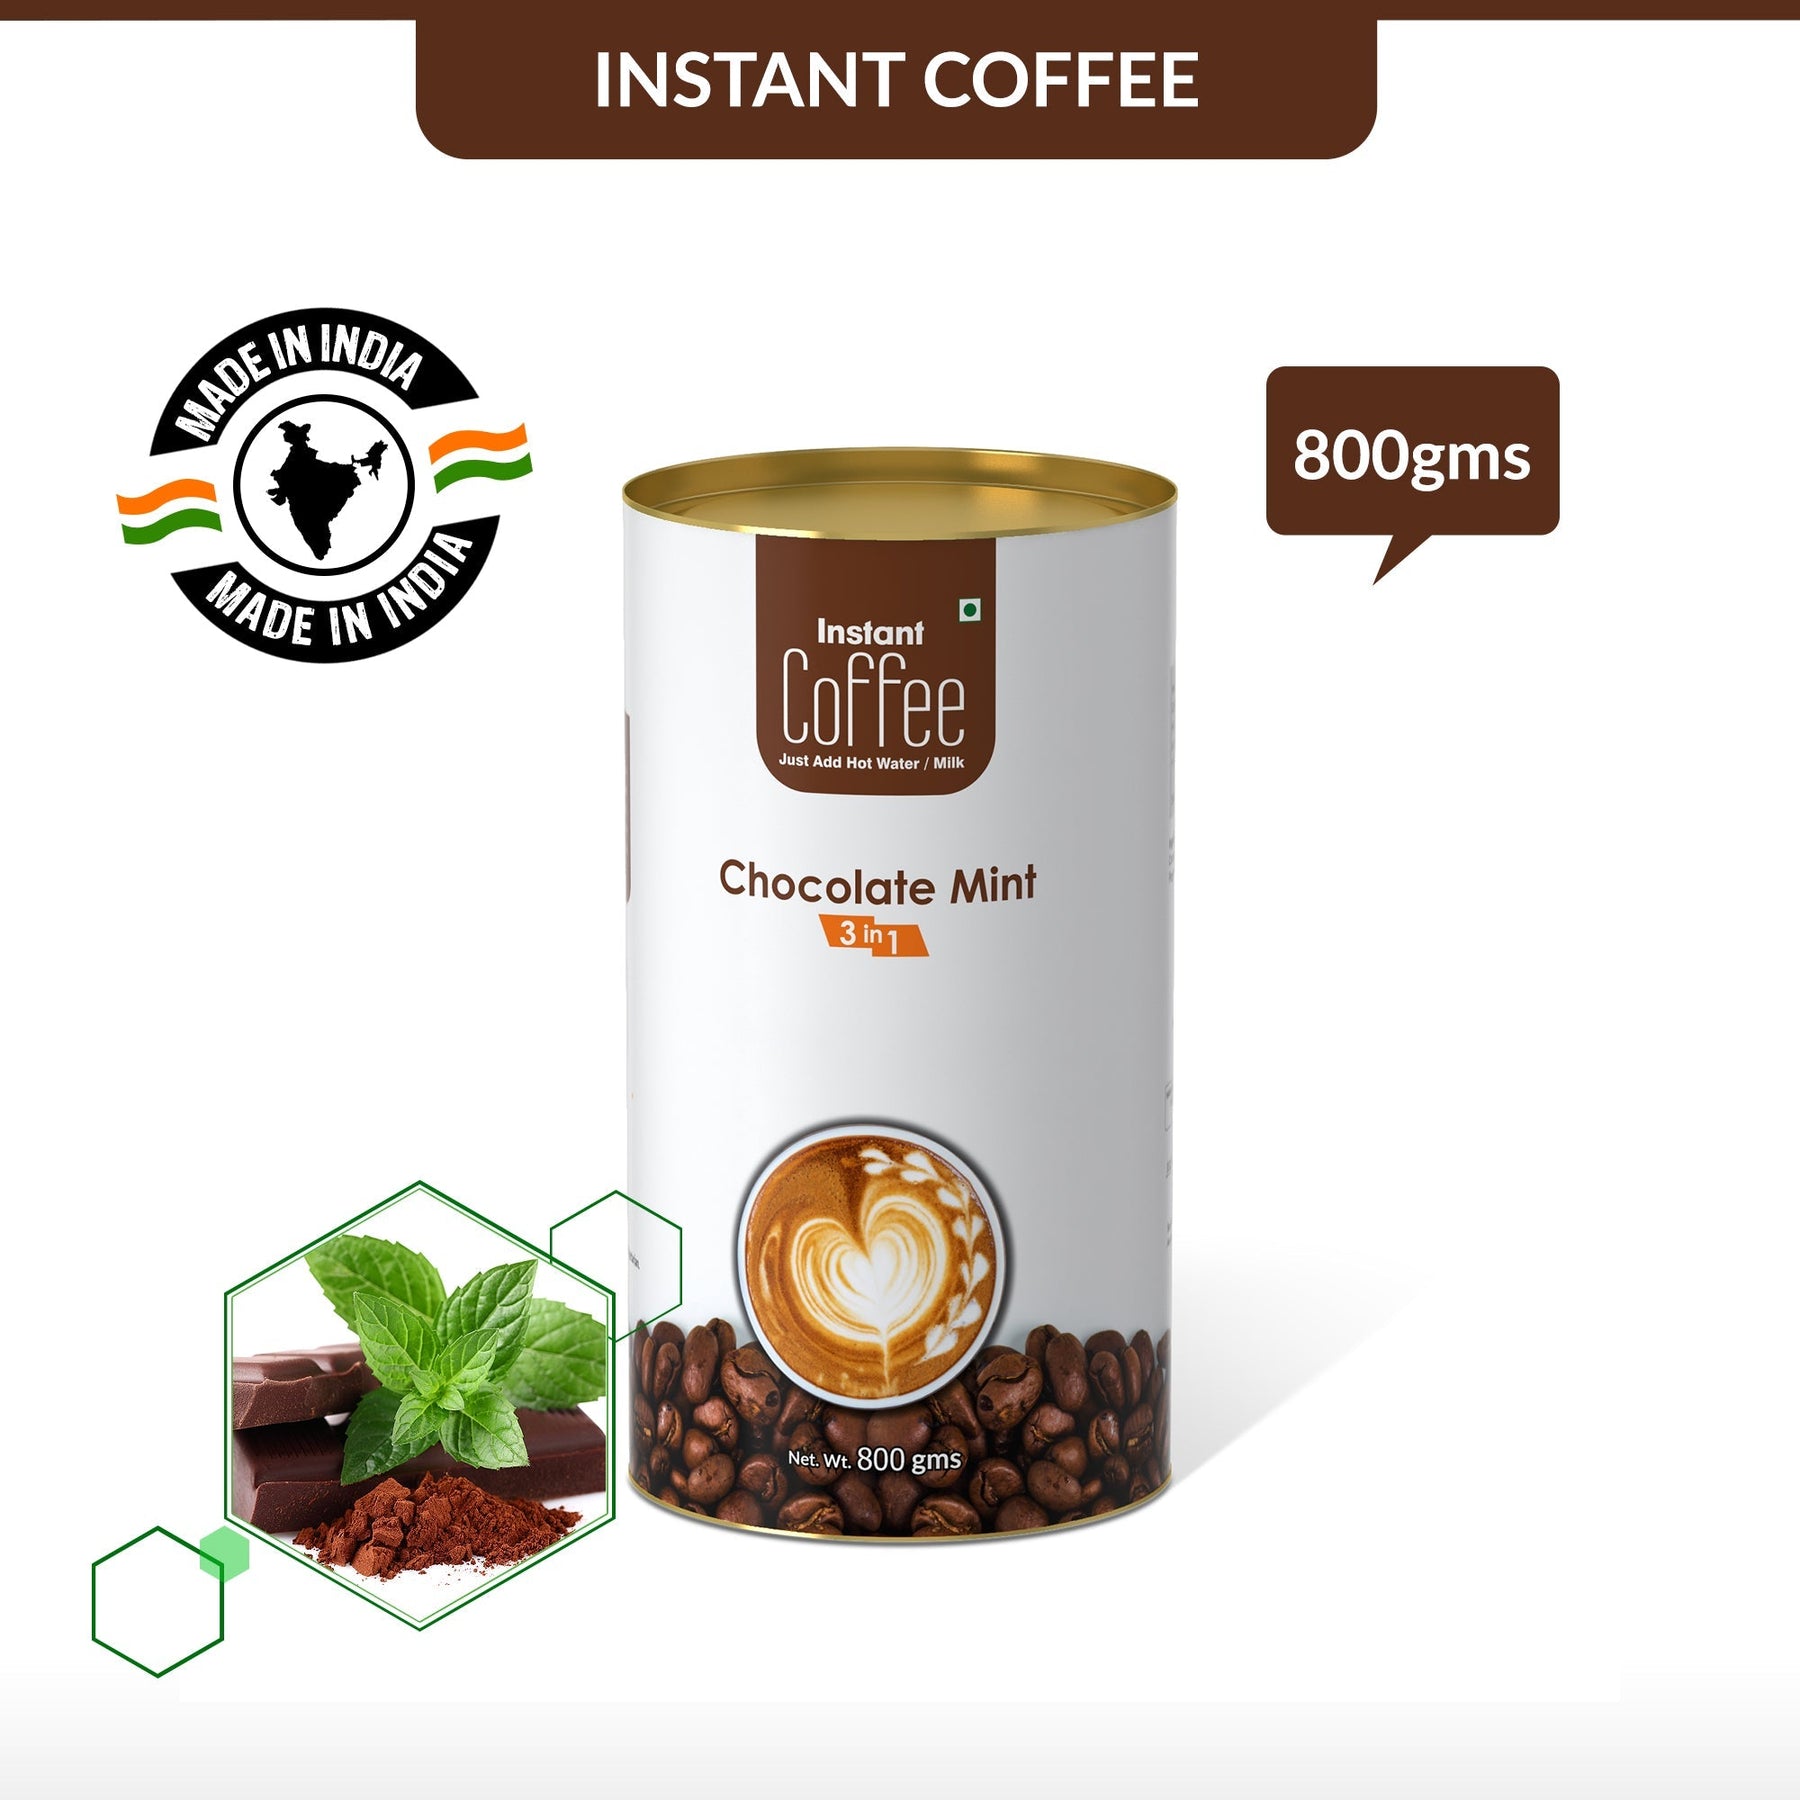 Chocolate Mint Instant Coffee Premix (3 in 1) - 800 gms